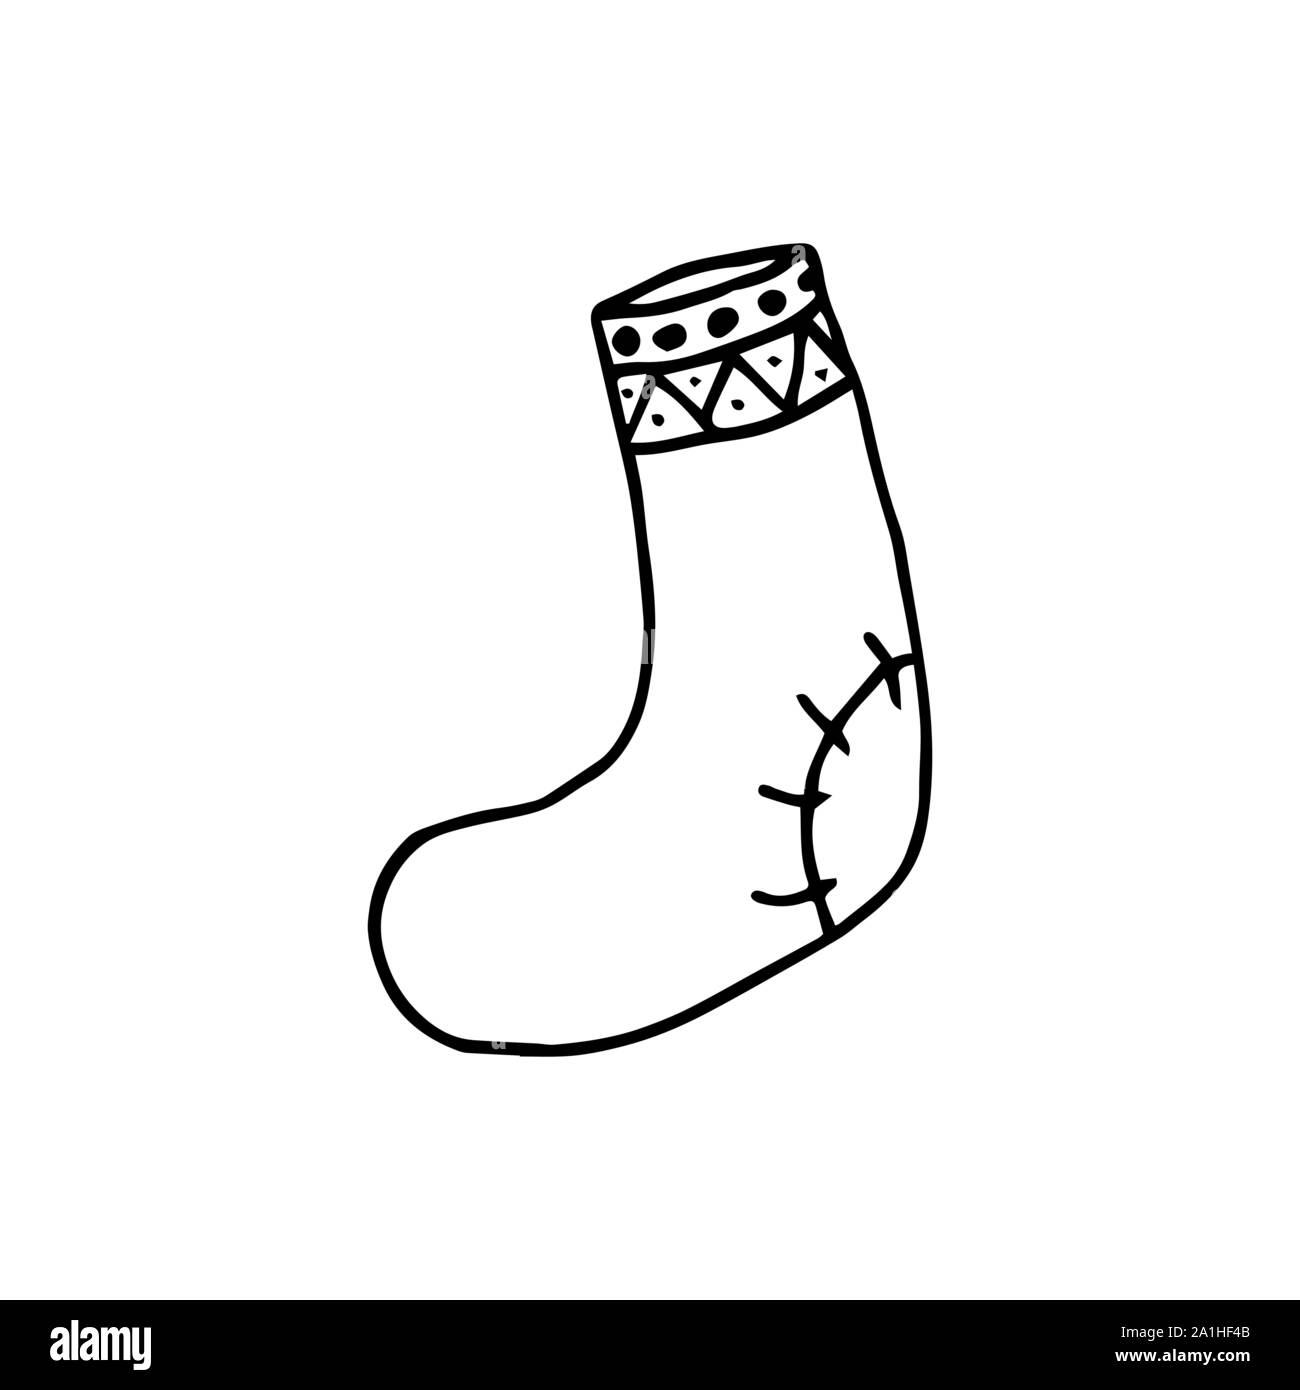 Winter sock. Hand drawing. Black outline on white background. Picture can be used in christmas and new year greeting cards, posters, flyers, banners, logo etc. Vector illustration. EPS10 Stock Vector